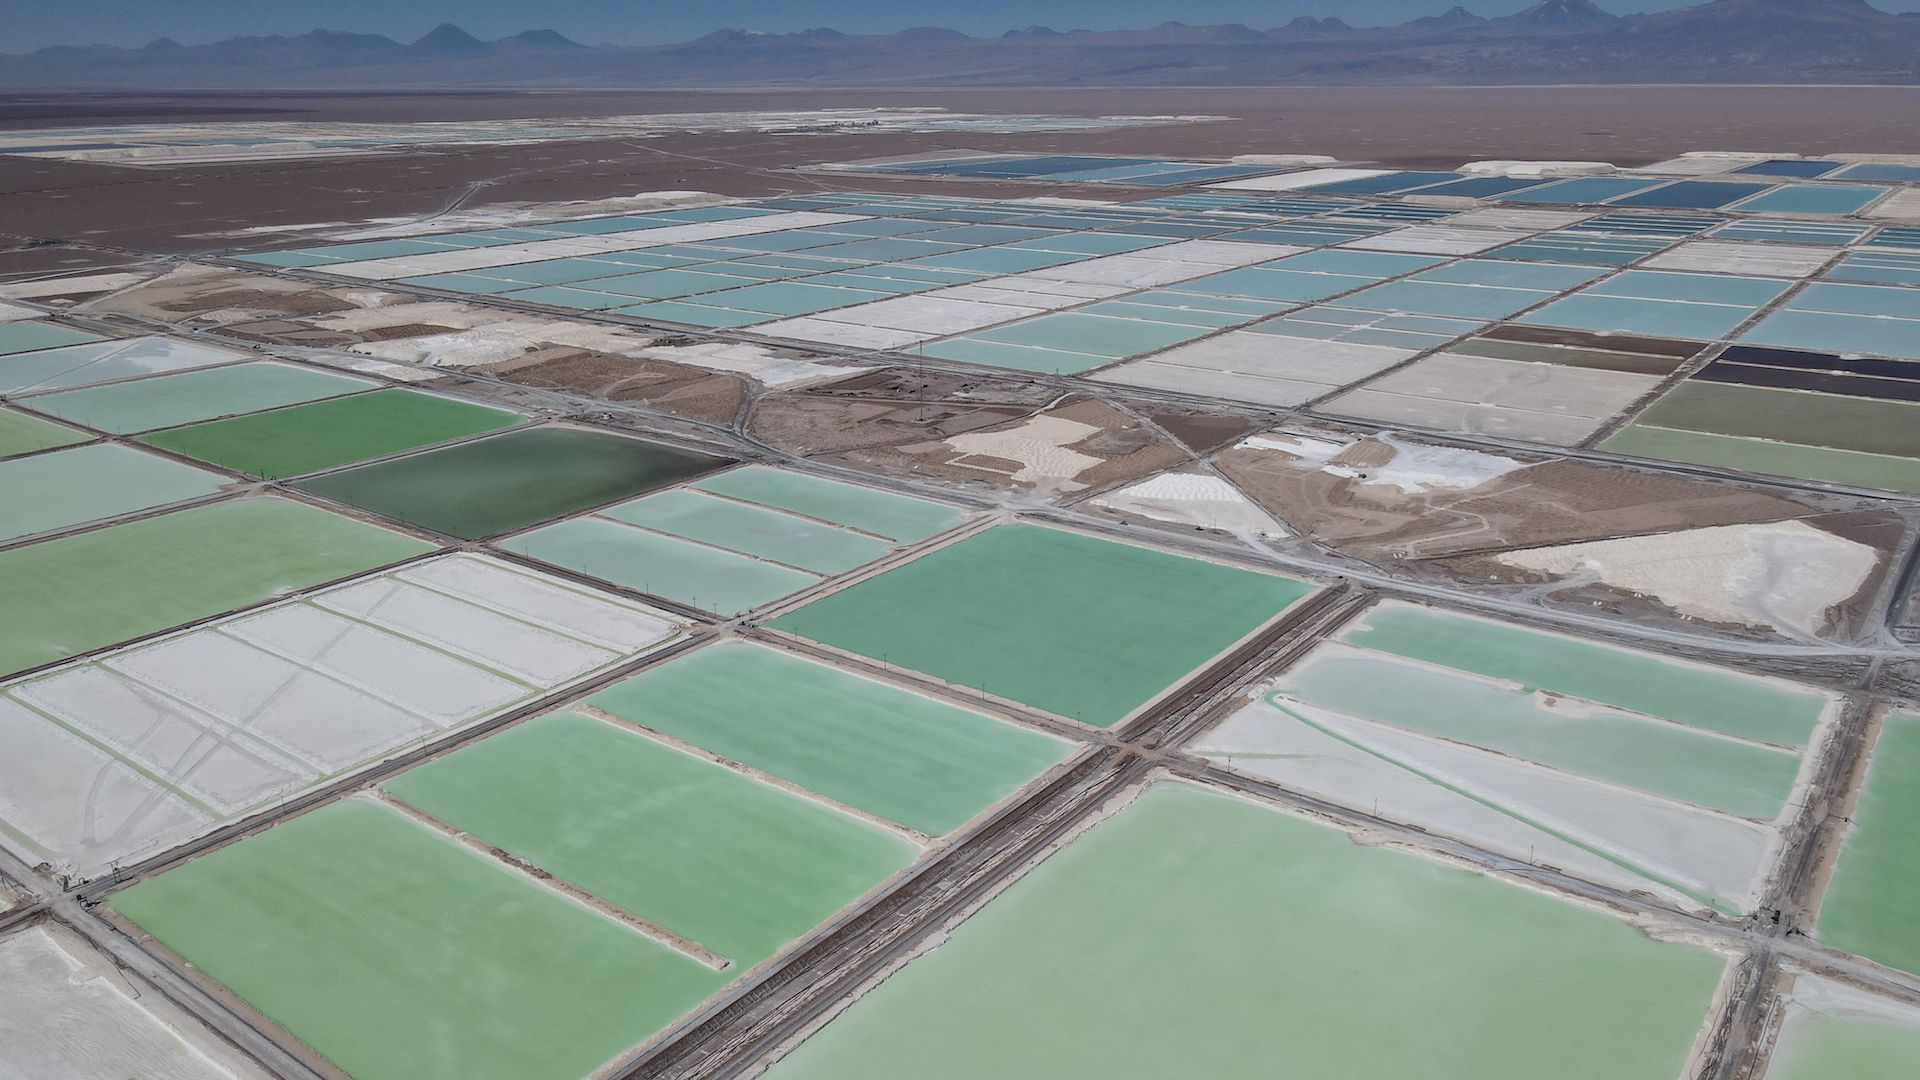  Pools of brine containing lithium carbonate and mounds of salt by-products stretch across a lithium mine in the Atacama Desert in Chile 